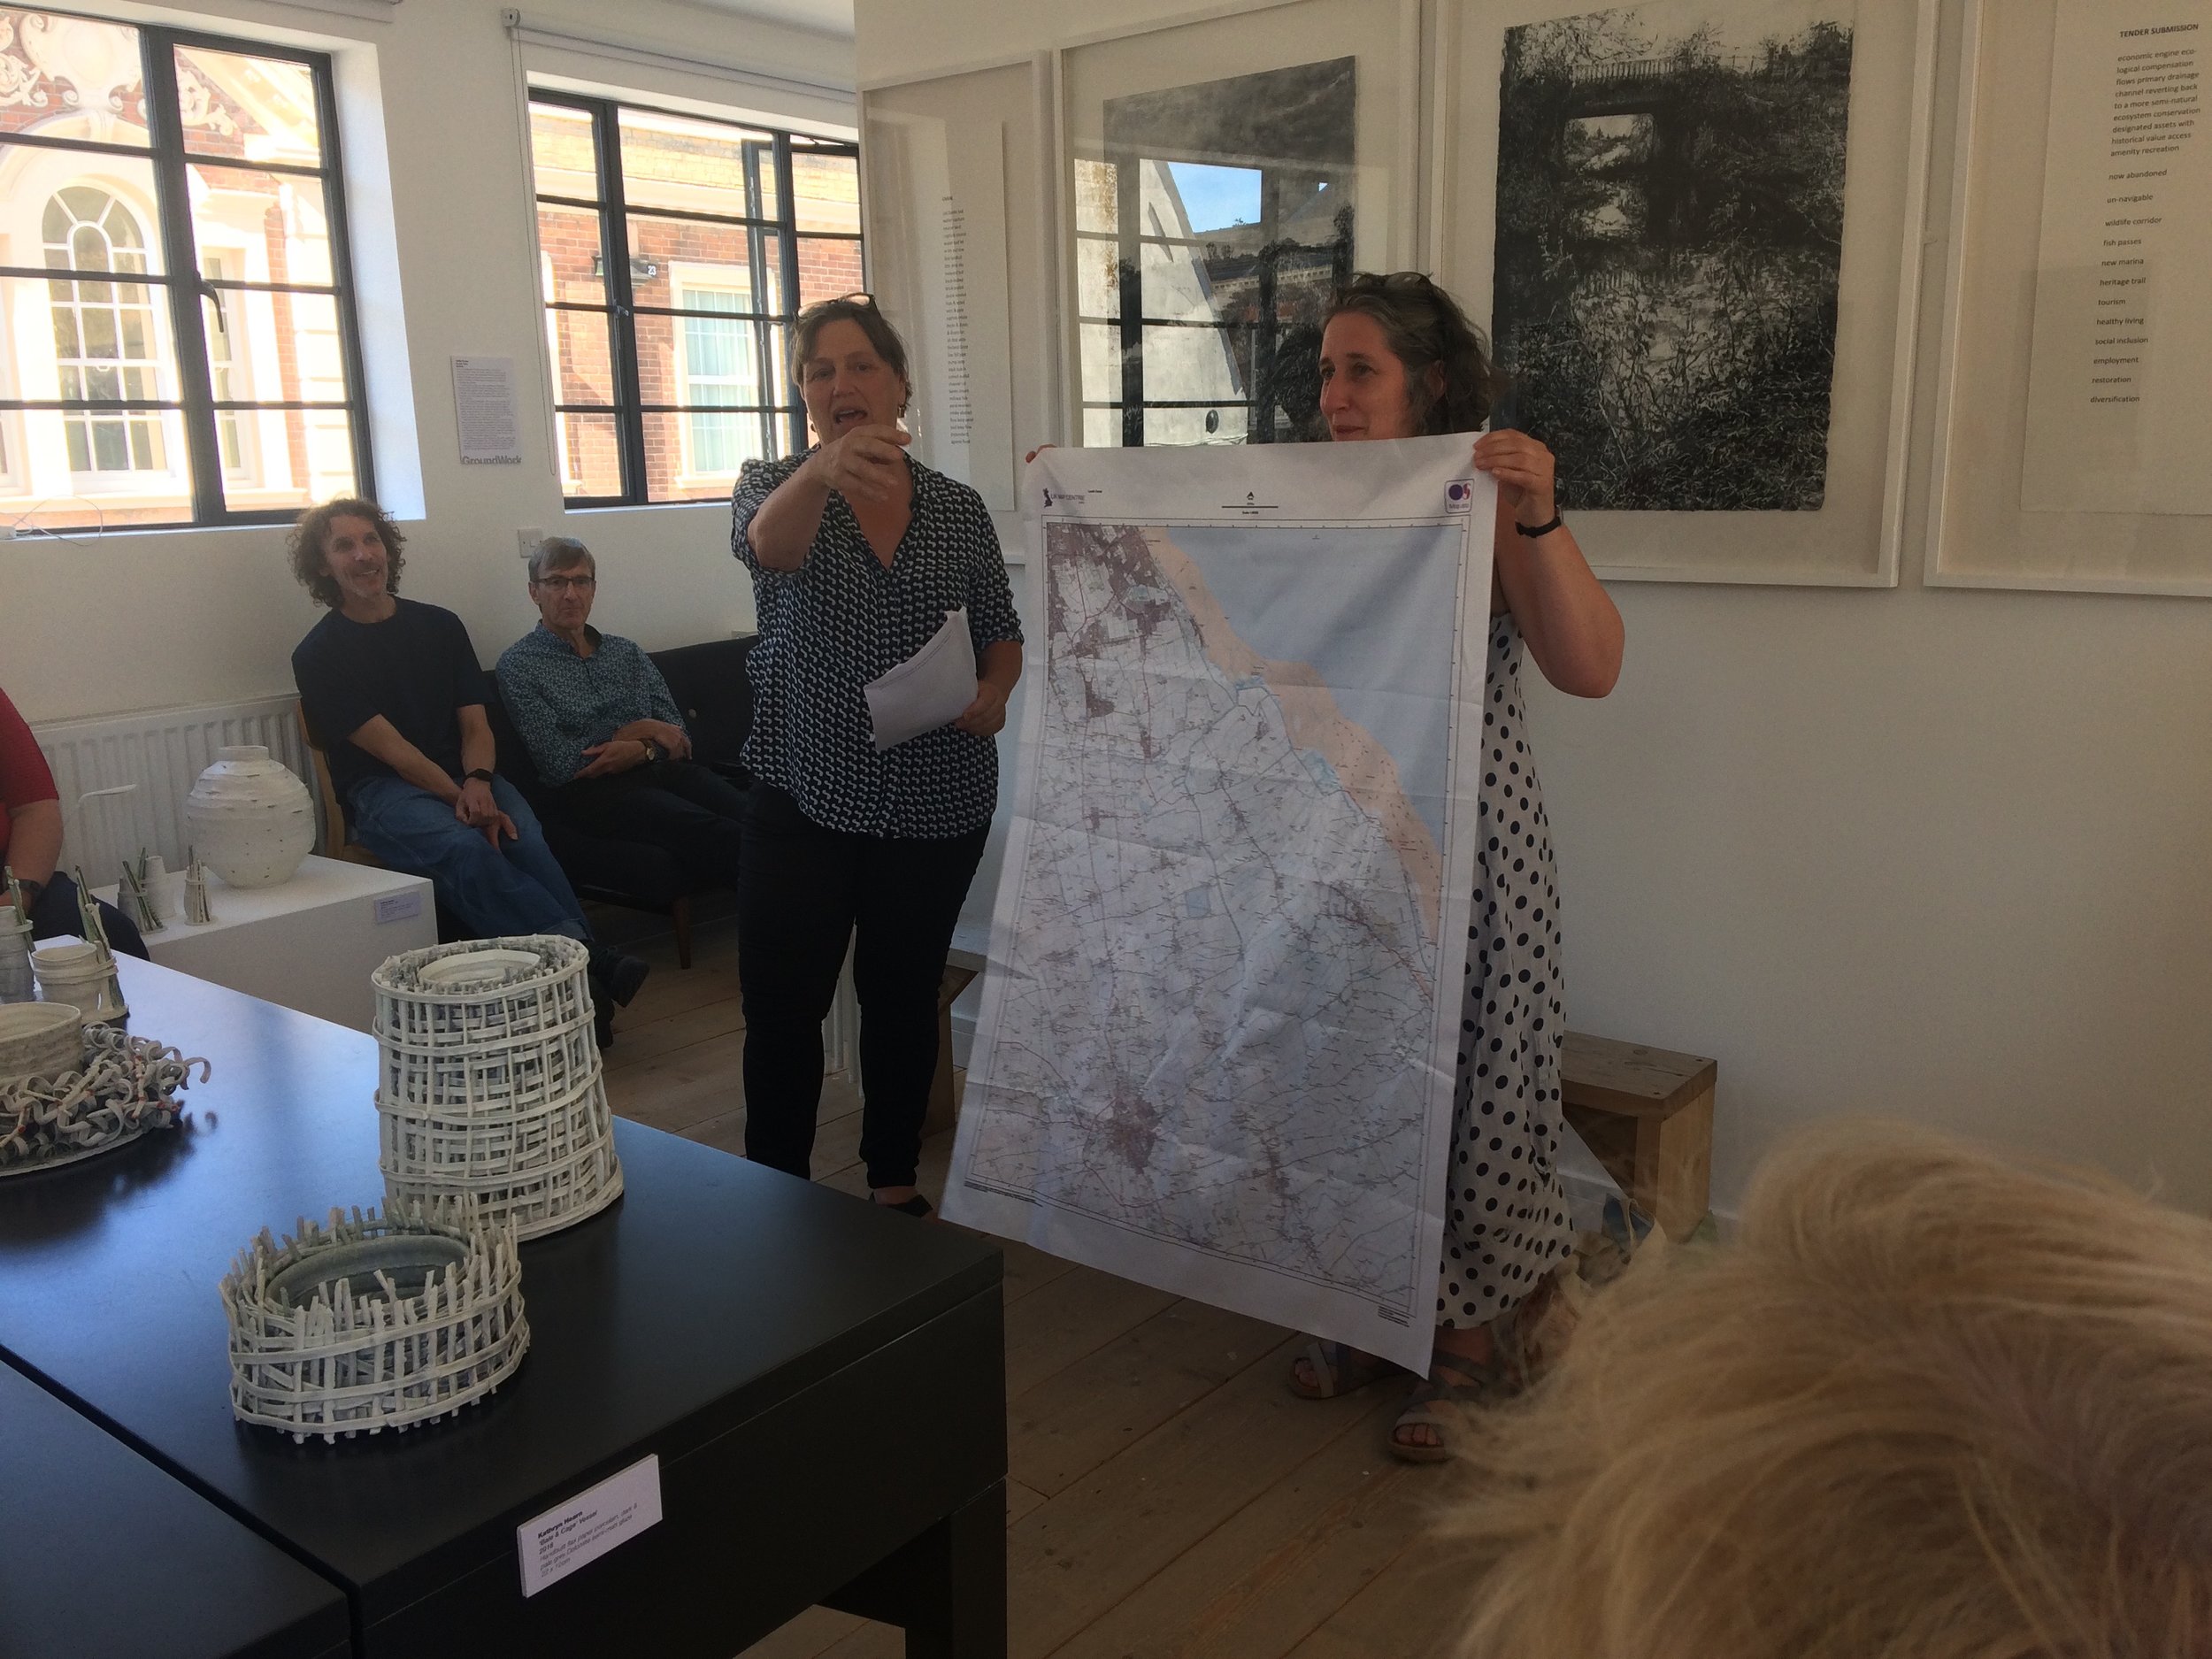  Judith Tucker and Harriet Tarlo talking about their work at GroundWork Gallery on 24th June 